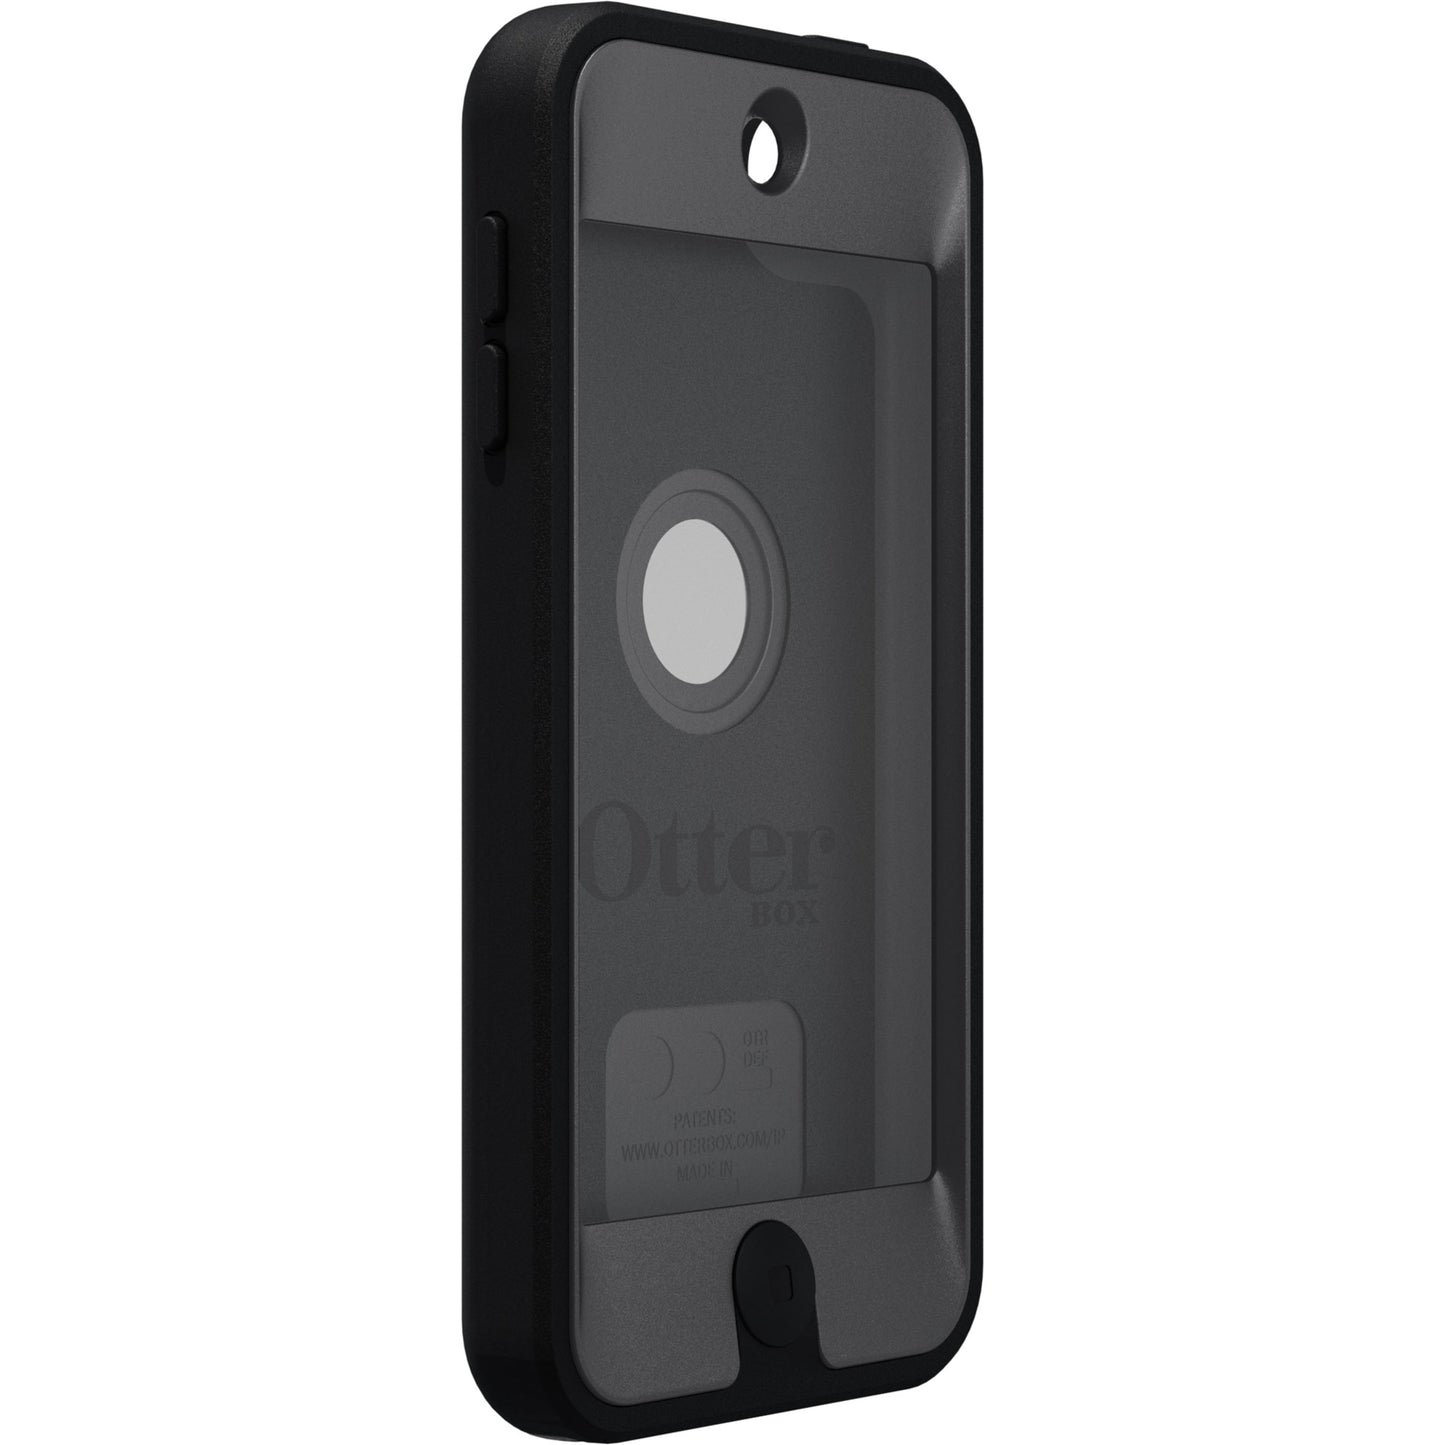 OtterBox Defender Rugged Carrying Case (Holster) Apple iPod - Coal